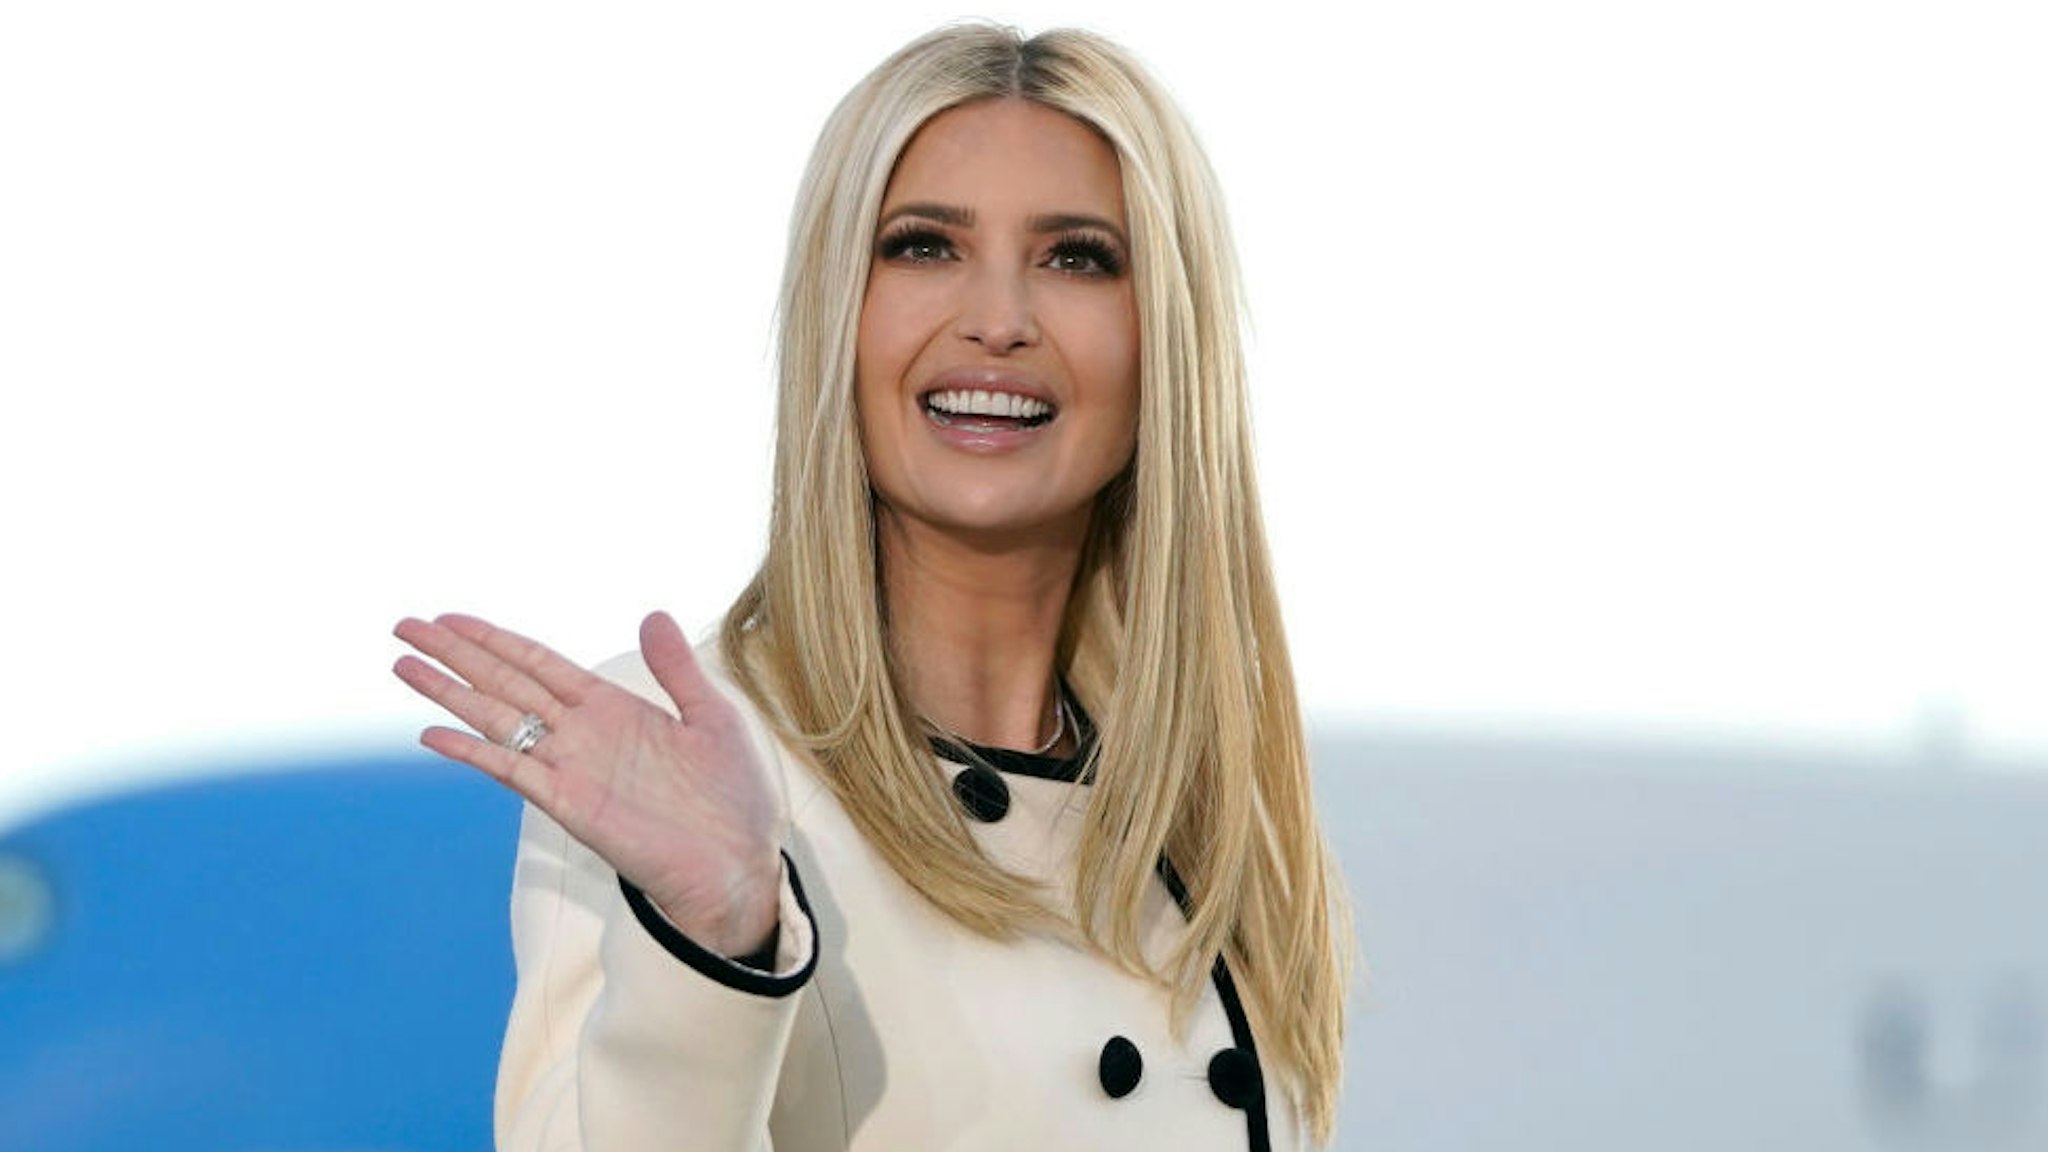 Ivanka Trump waves as she arrives at Joint Base Andrews in Maryland for US President Donald Trump's departure on January 20, 2021.